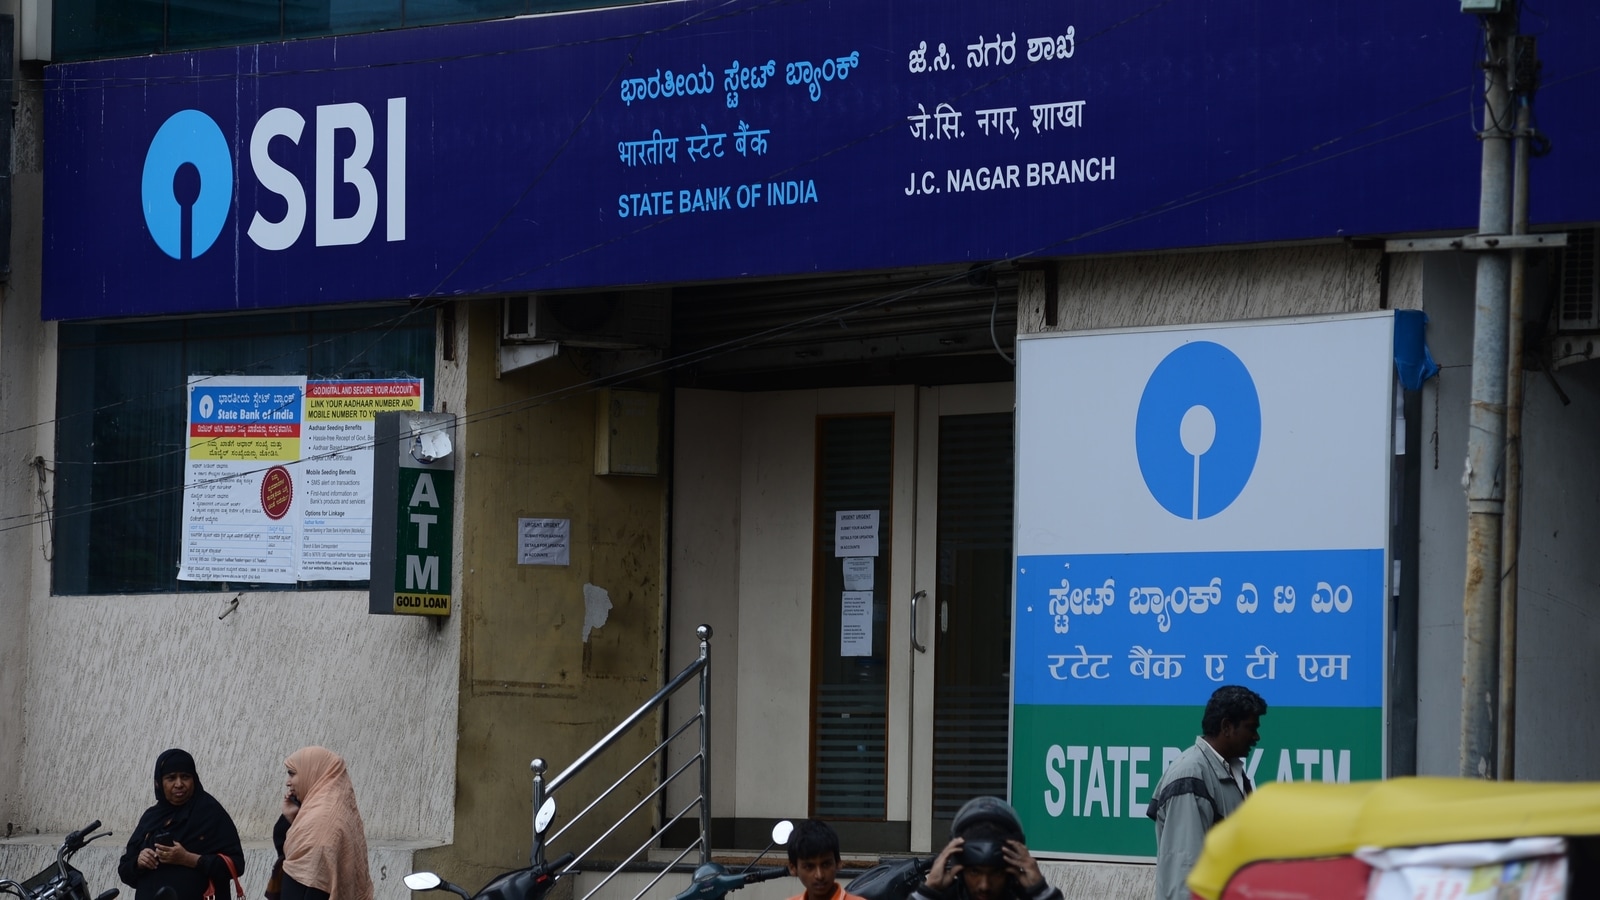 Bank alert: Rules change for bank customers this month. Detail here